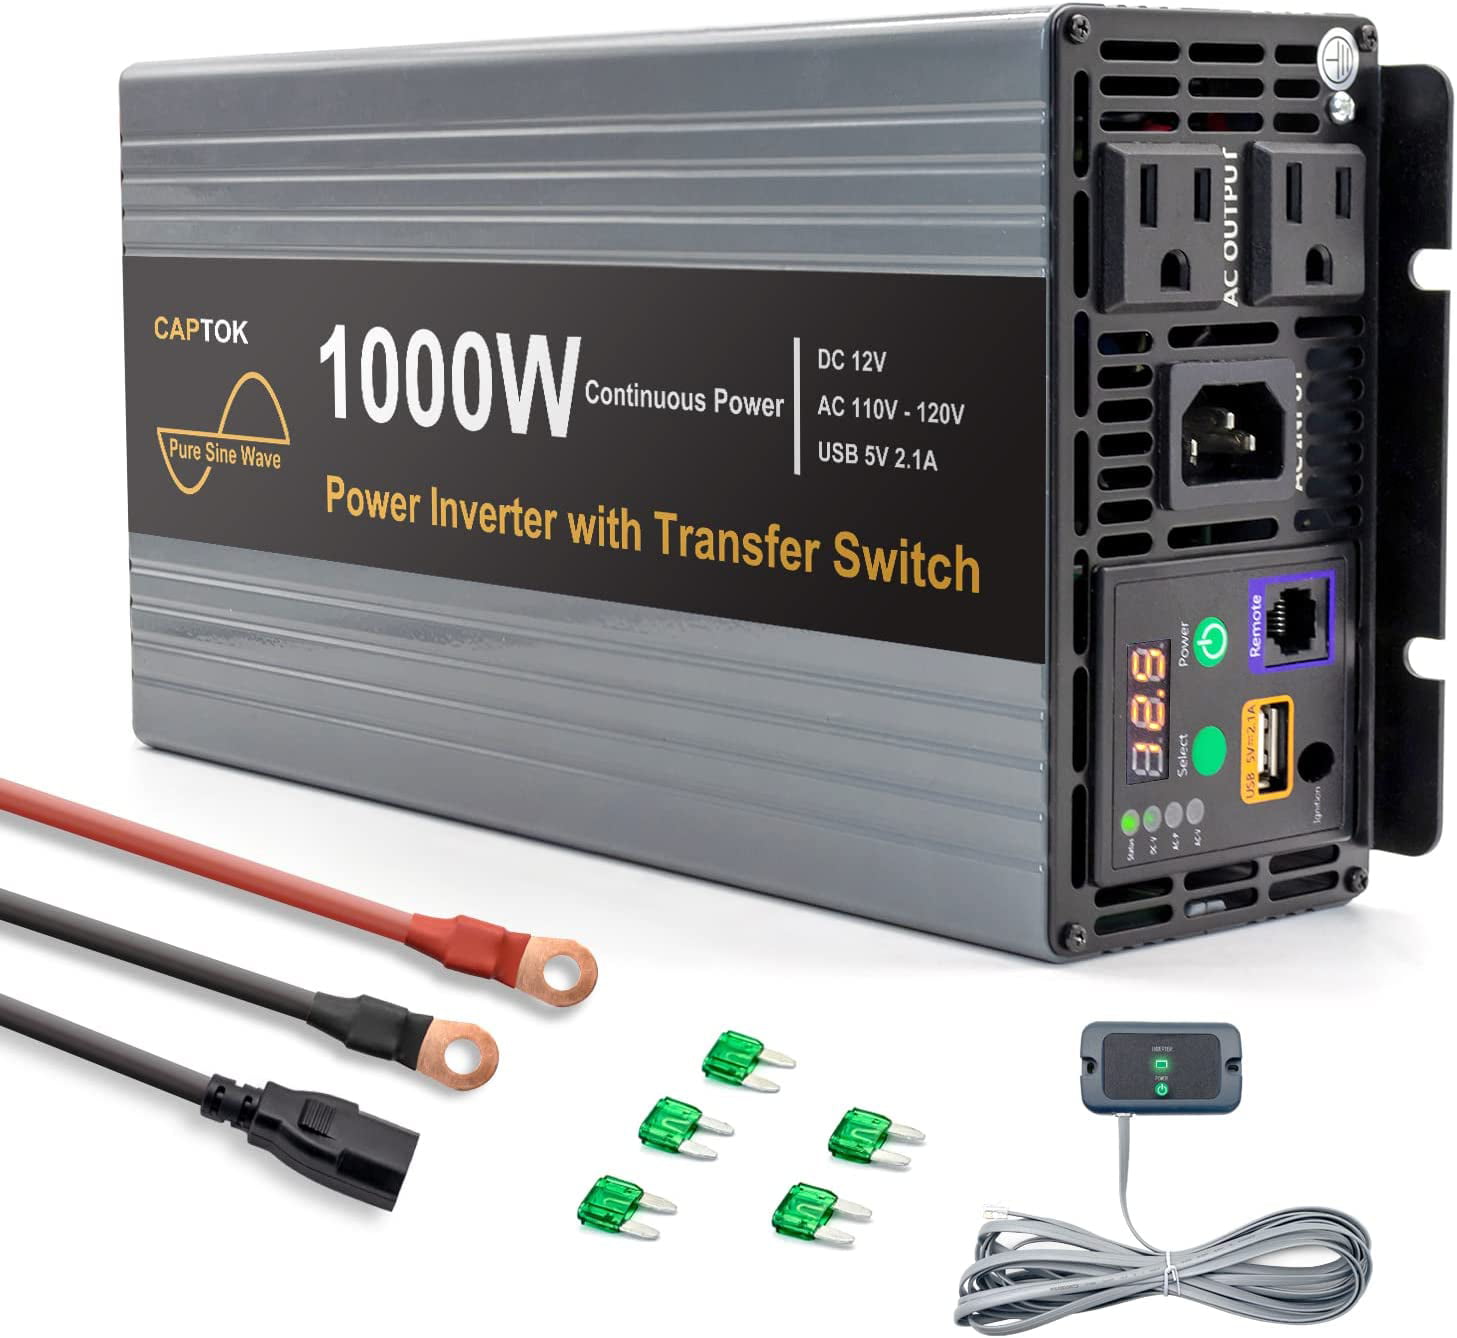 CAPTOK Pure Sine Wave Power Inverter 1000W with Automatic Transfer Switch DC 12V to AC 110V 120V Dual AC Outlets LED Display 2.1A USB Remote Control Solar Inverter 